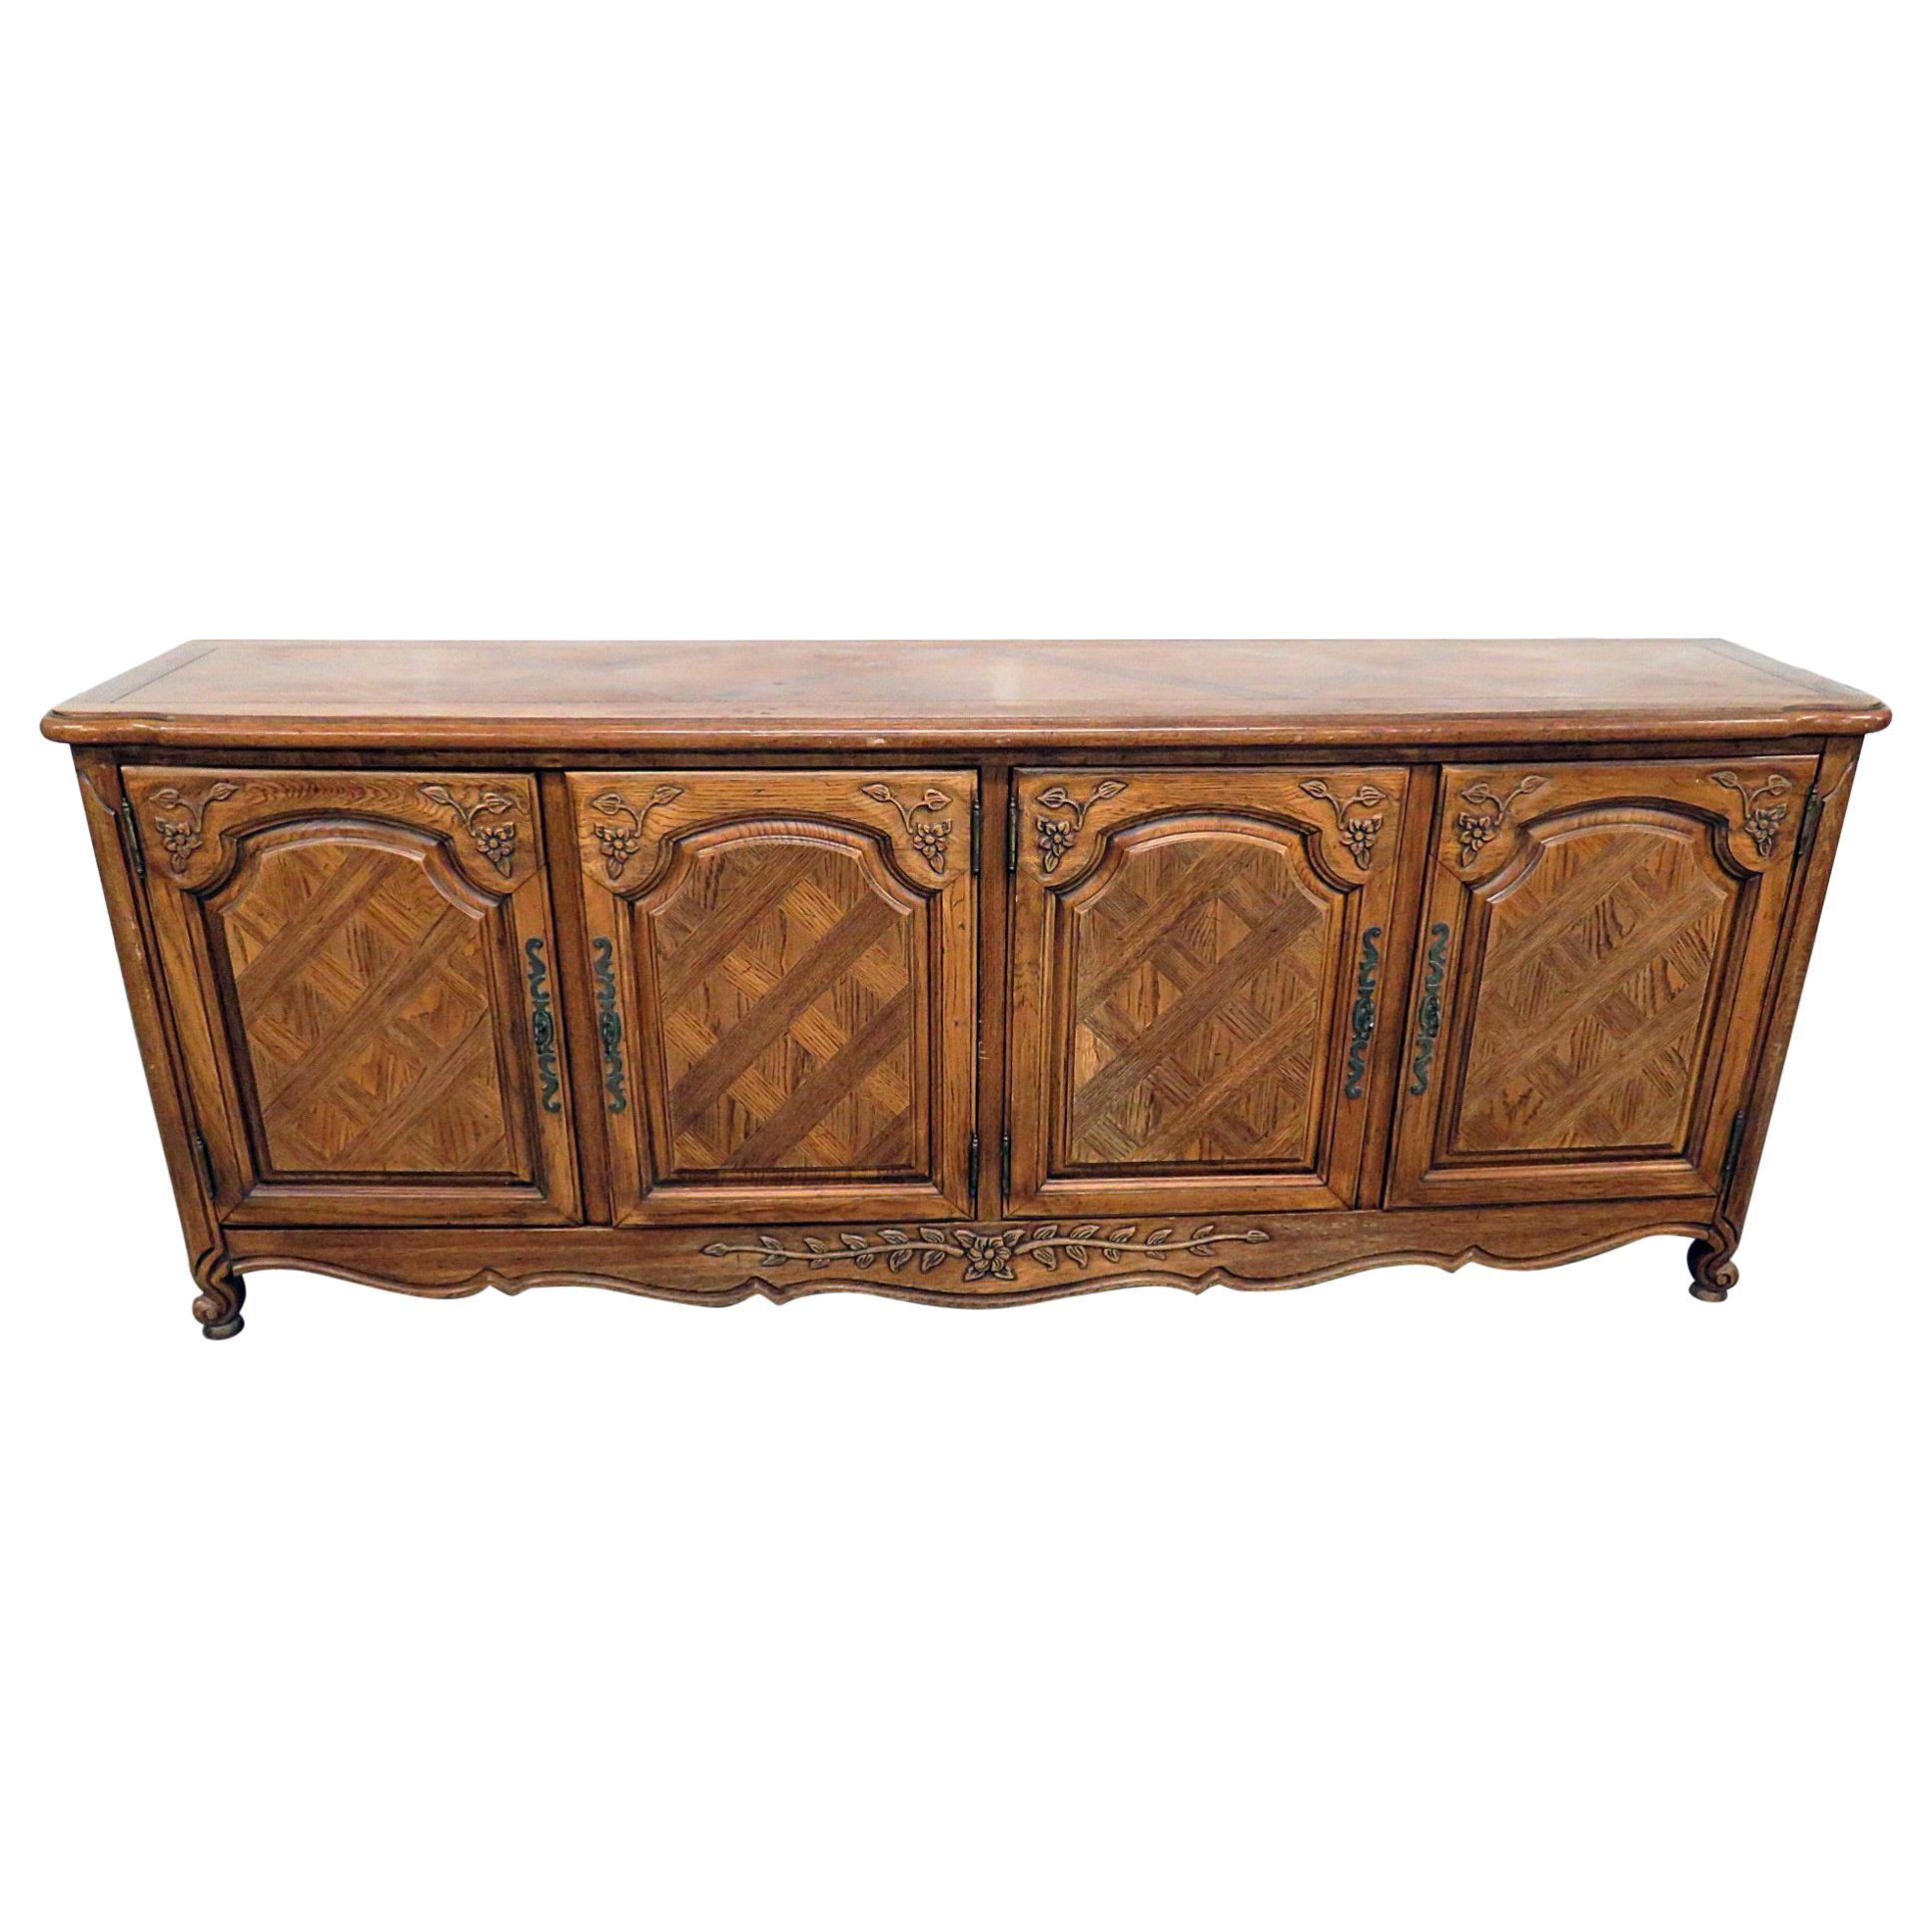 Thomasville Country French Style Sideboard Buffet Server